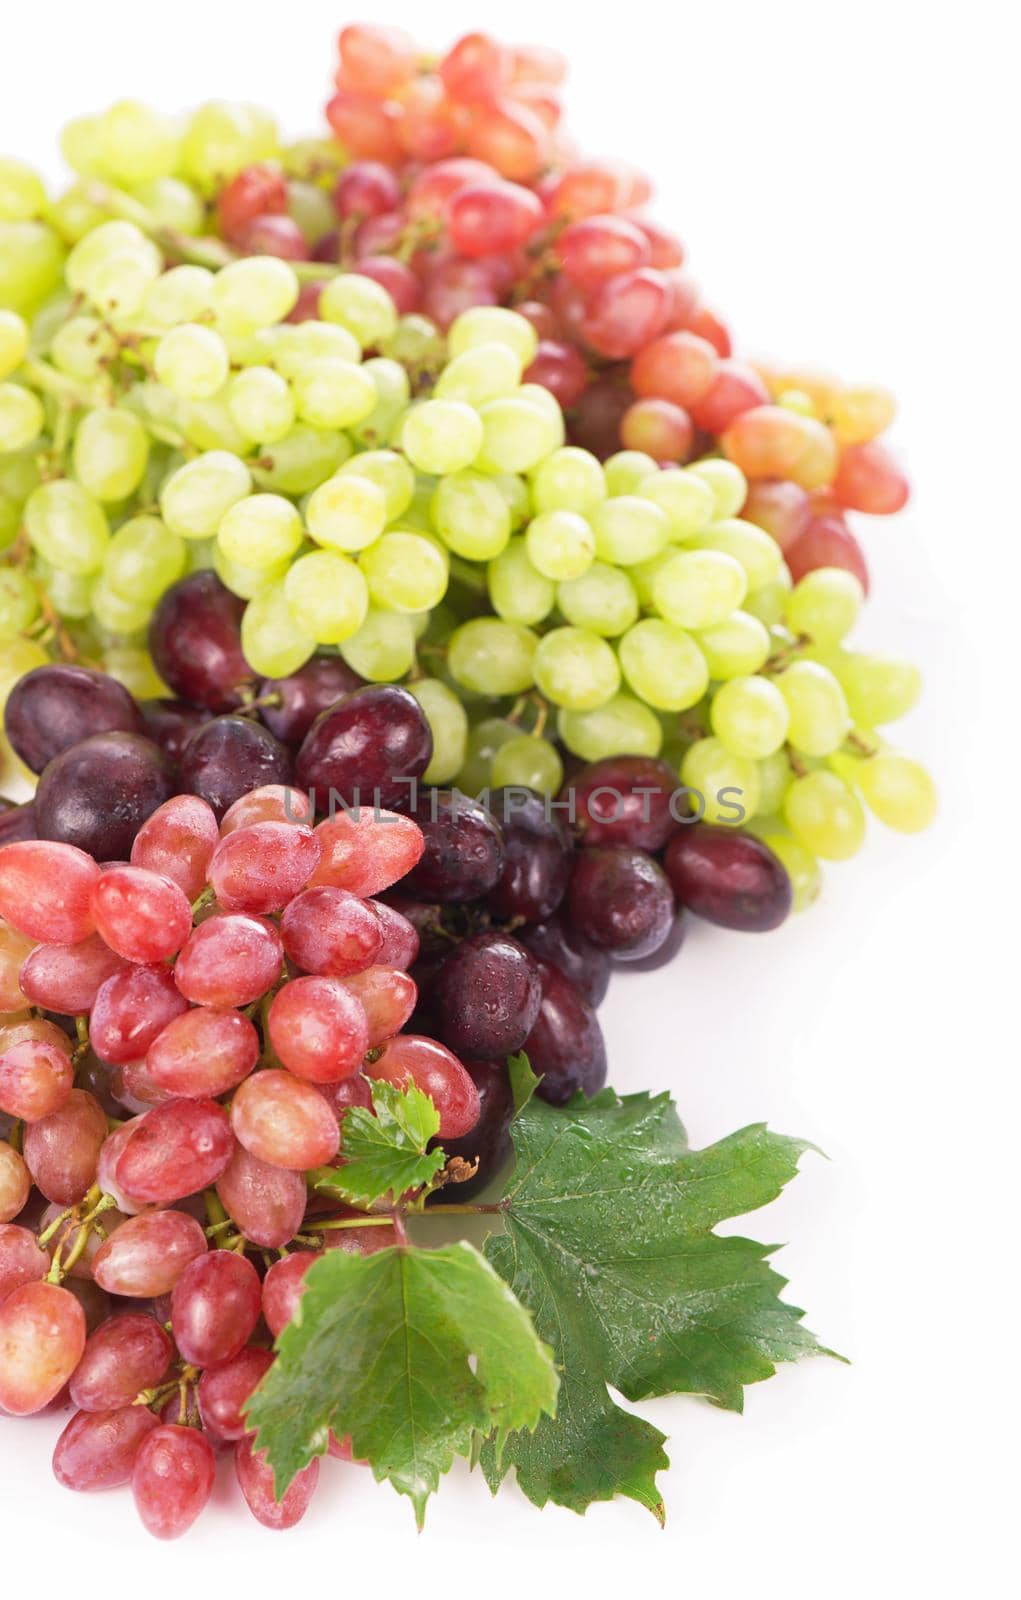 Red and white table grapes, wine grapes. by aprilphoto